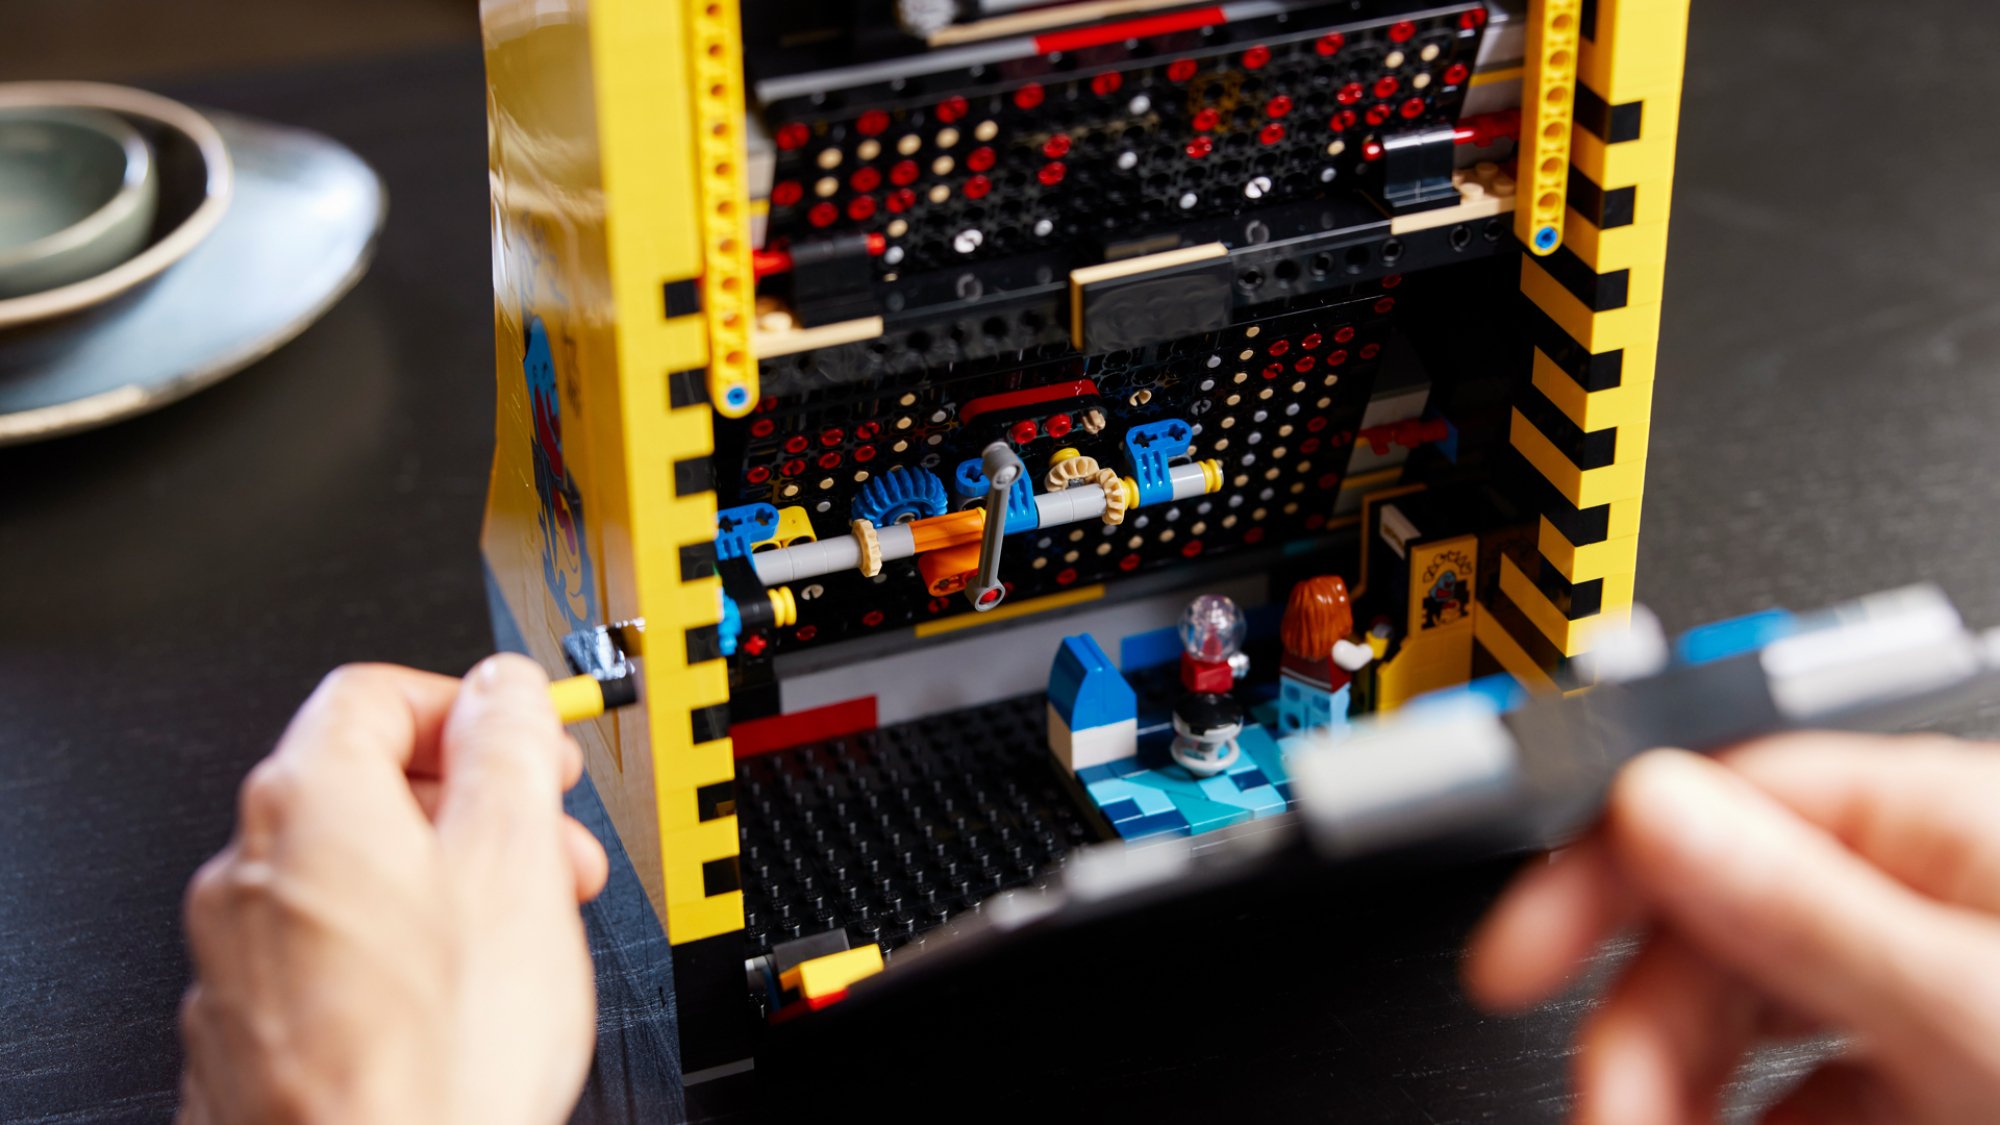 Inside the back of a Lego 'Pac-Man' machine showing a tiny Lego figure playing Pac-Man.